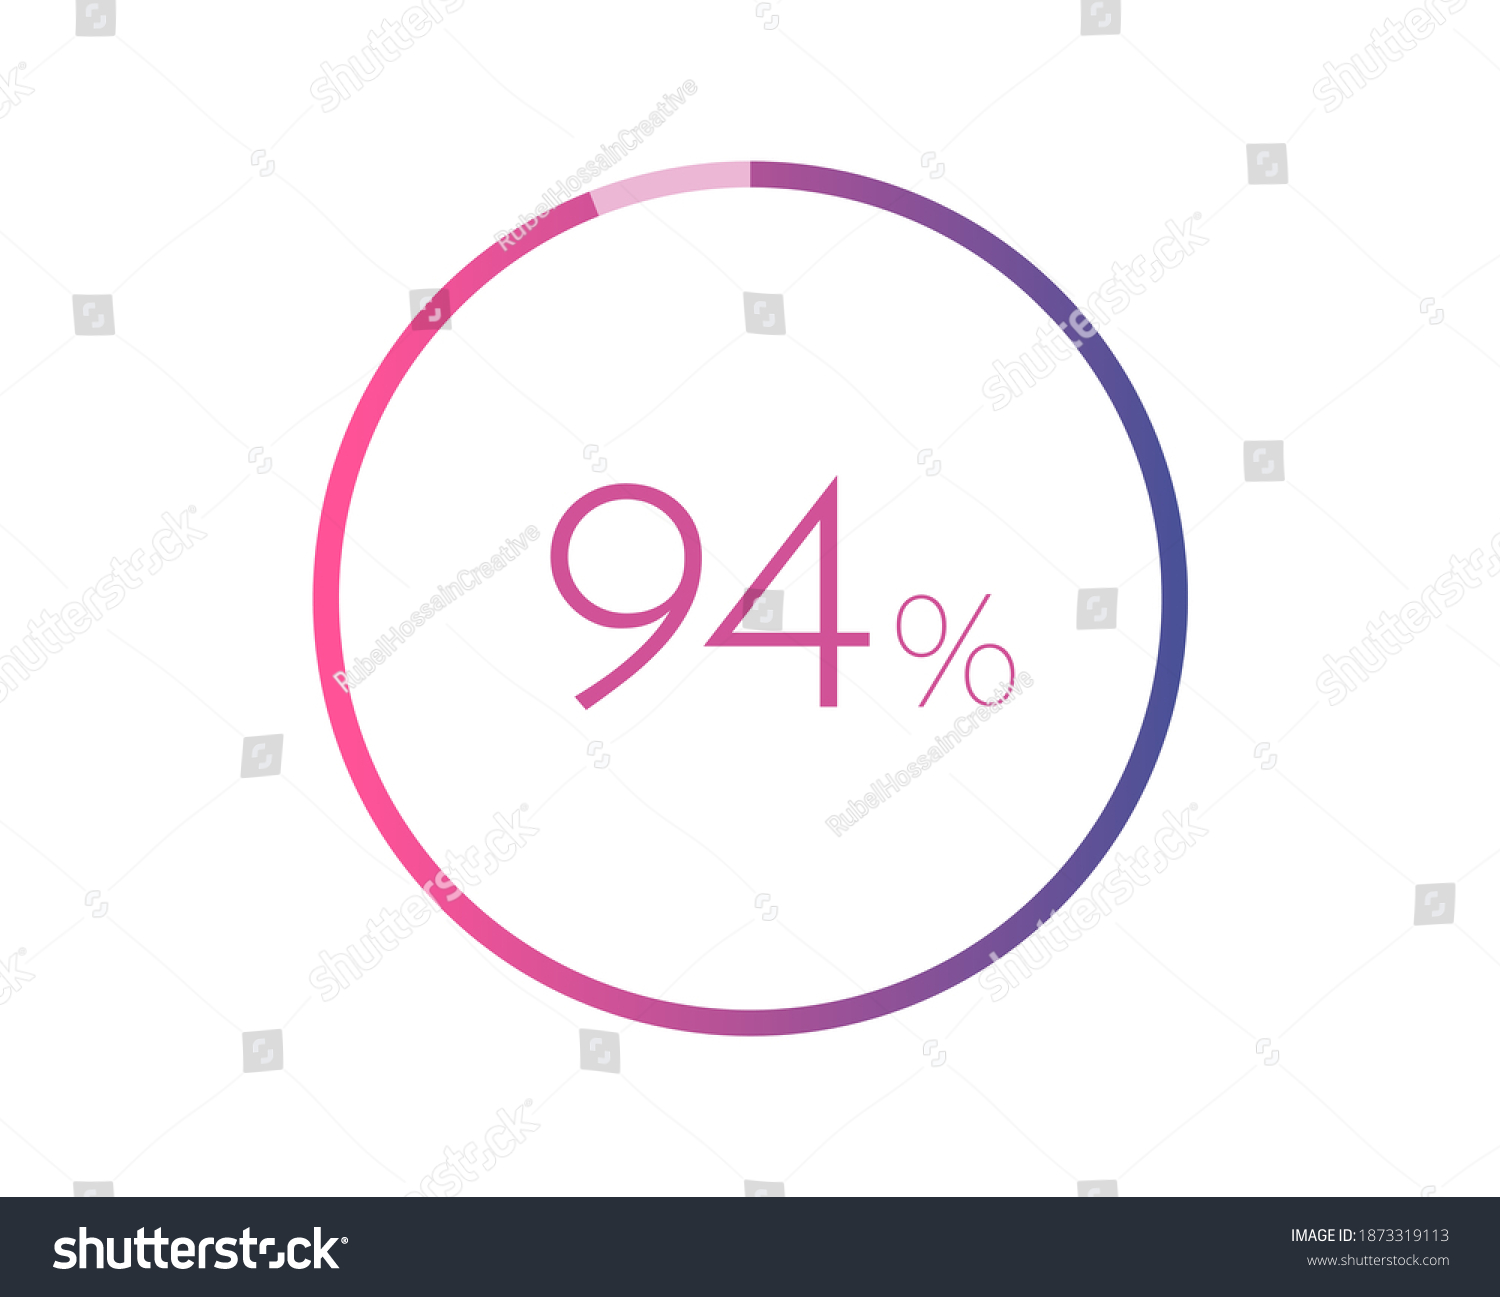 SVG of 94% percent circle chart symbol. 94 percentage Icons for business, finance, report, downloading svg